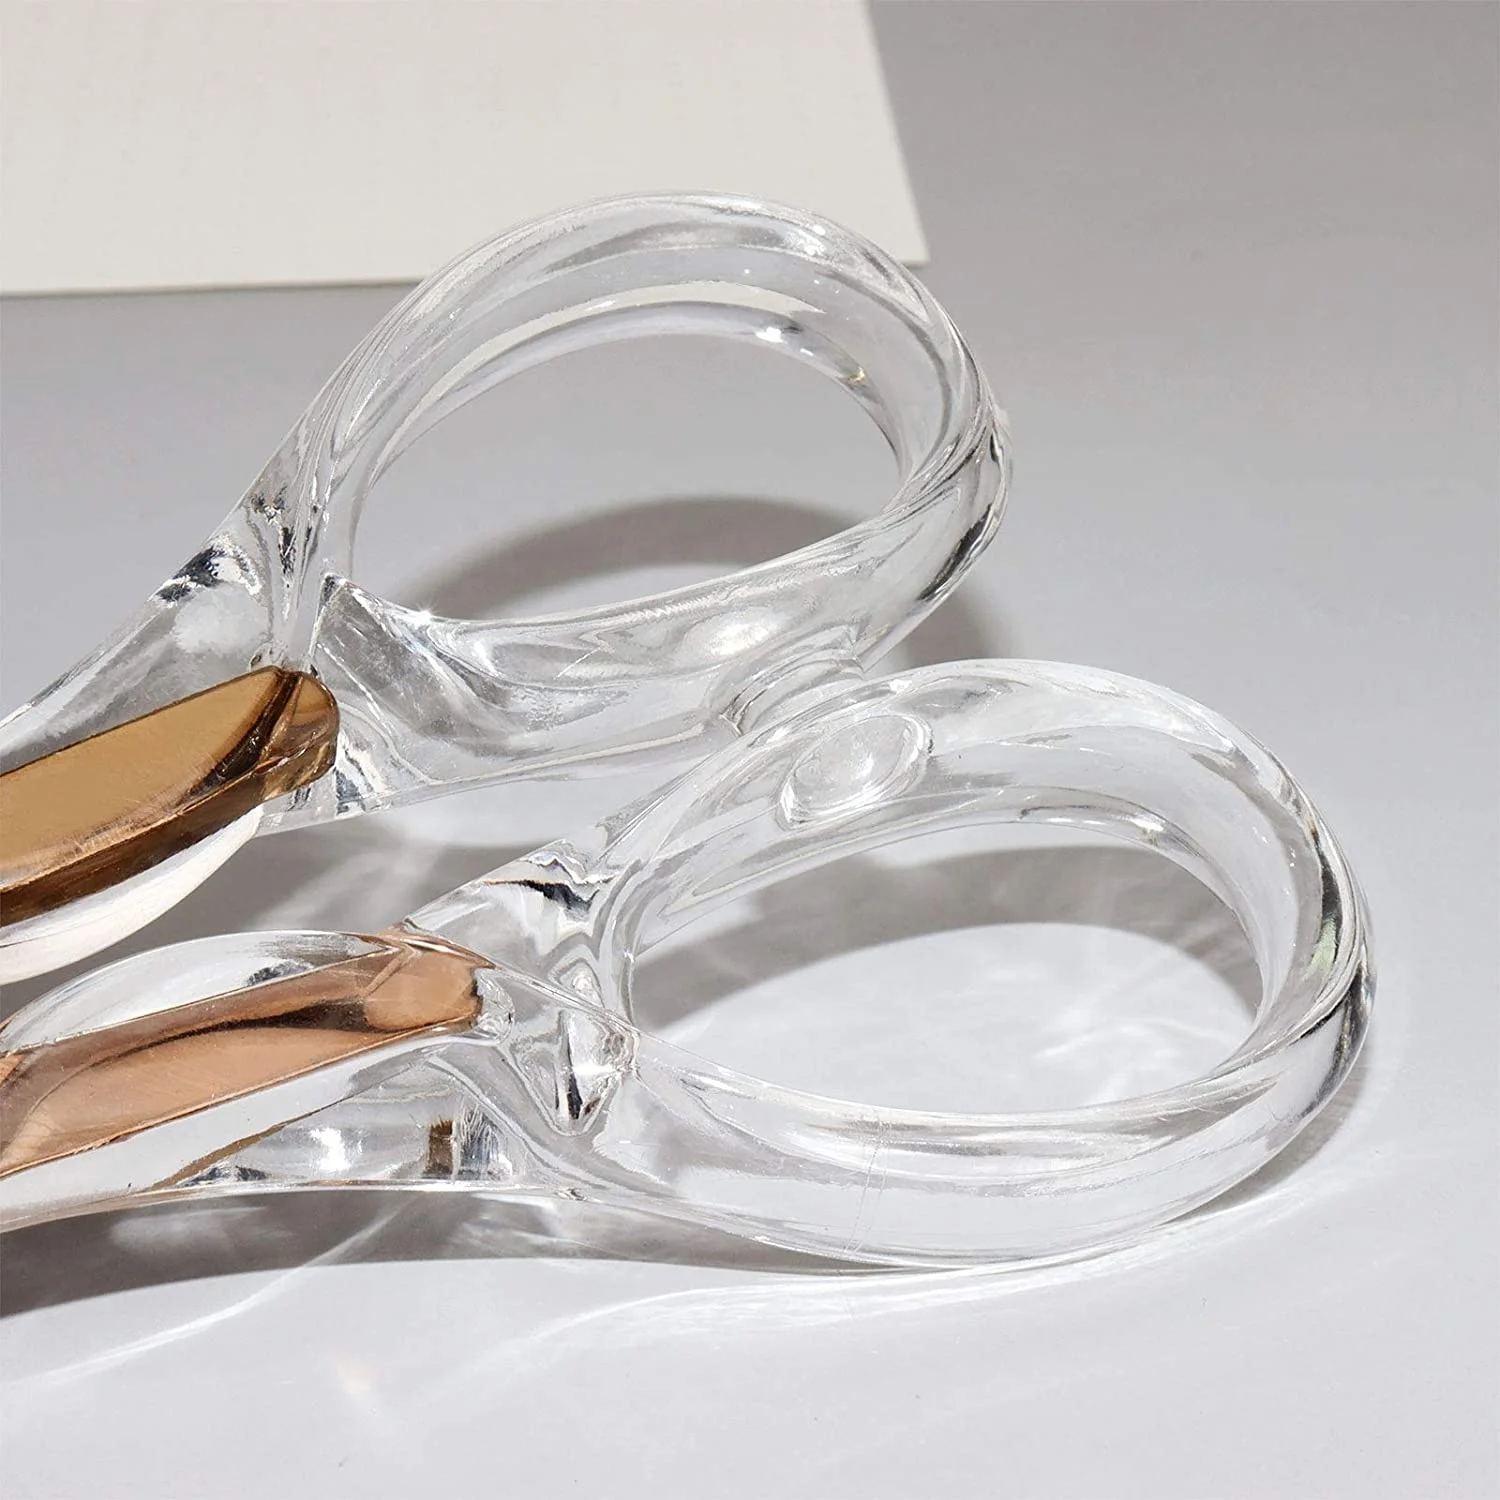 Modern Design Rose Gold With Clear Acrylic Handle Craft Cutting Scissors  Office Desk Accessories